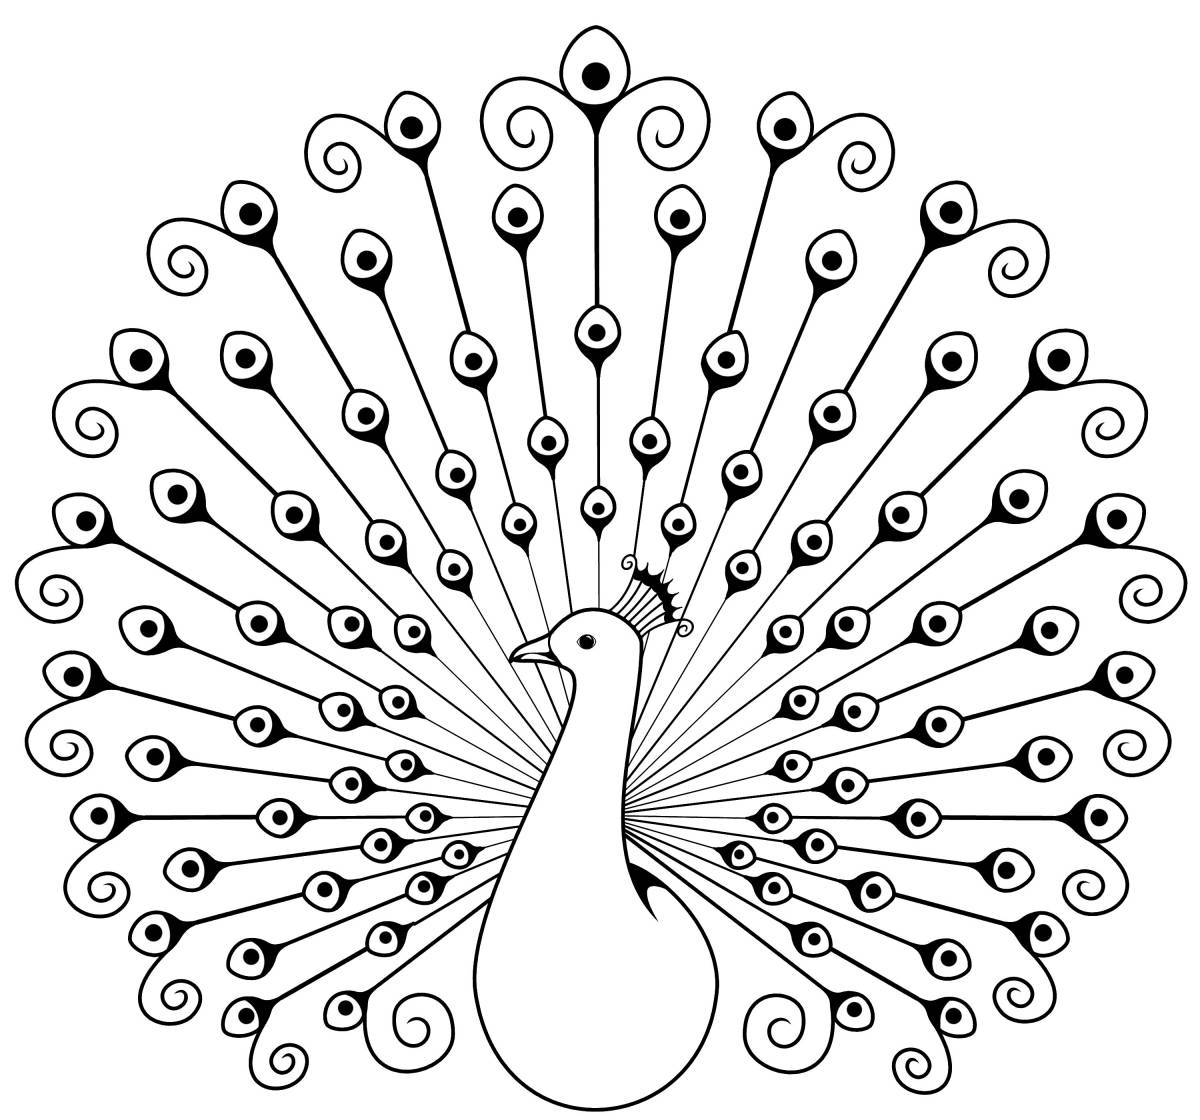 Whimsical firebird coloring book for kids